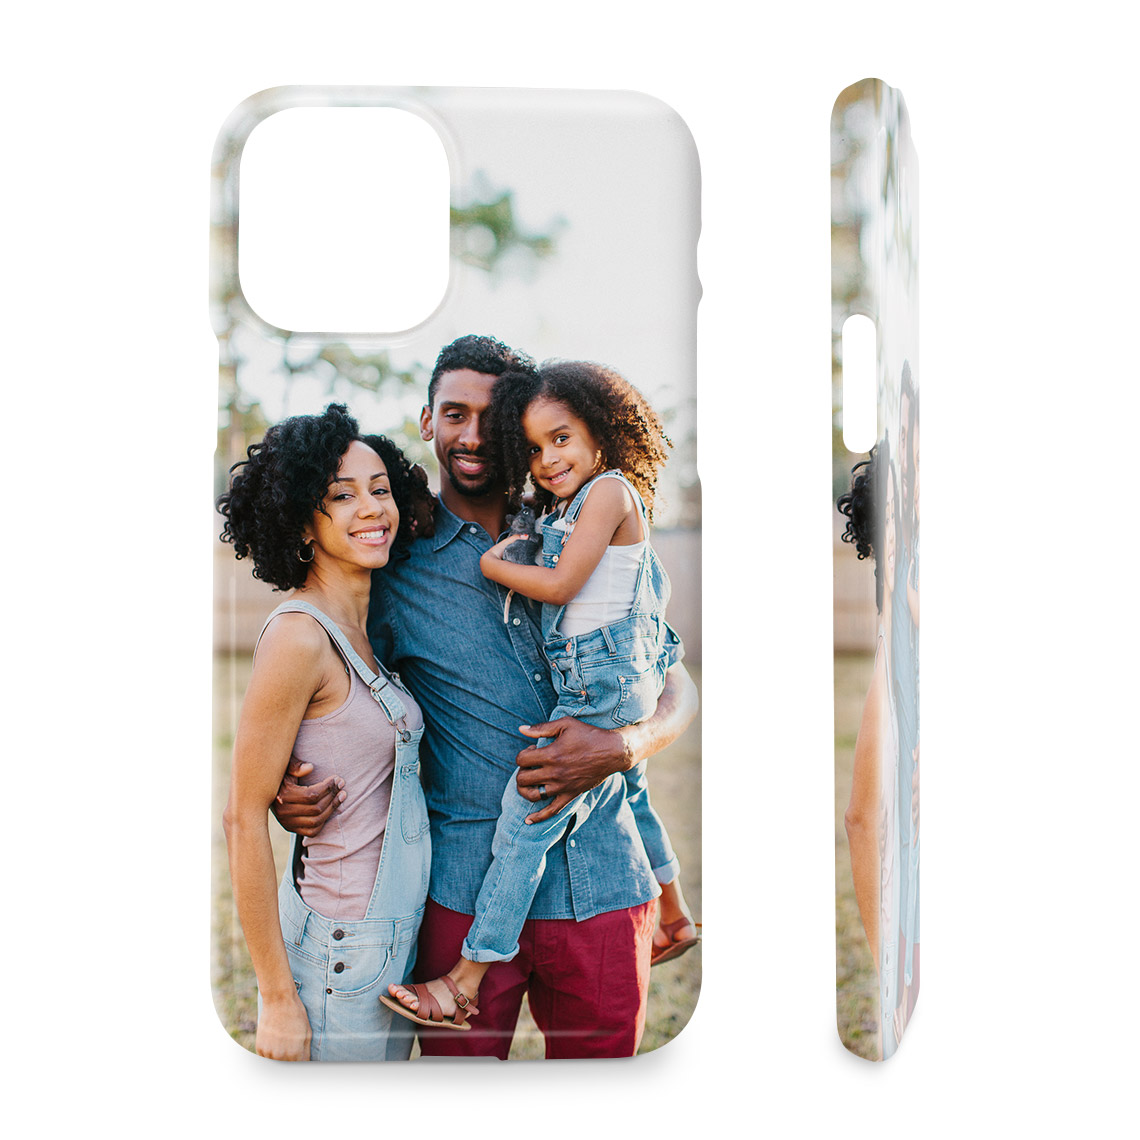 Personalised iPhone 11 Pro Cases & Covers